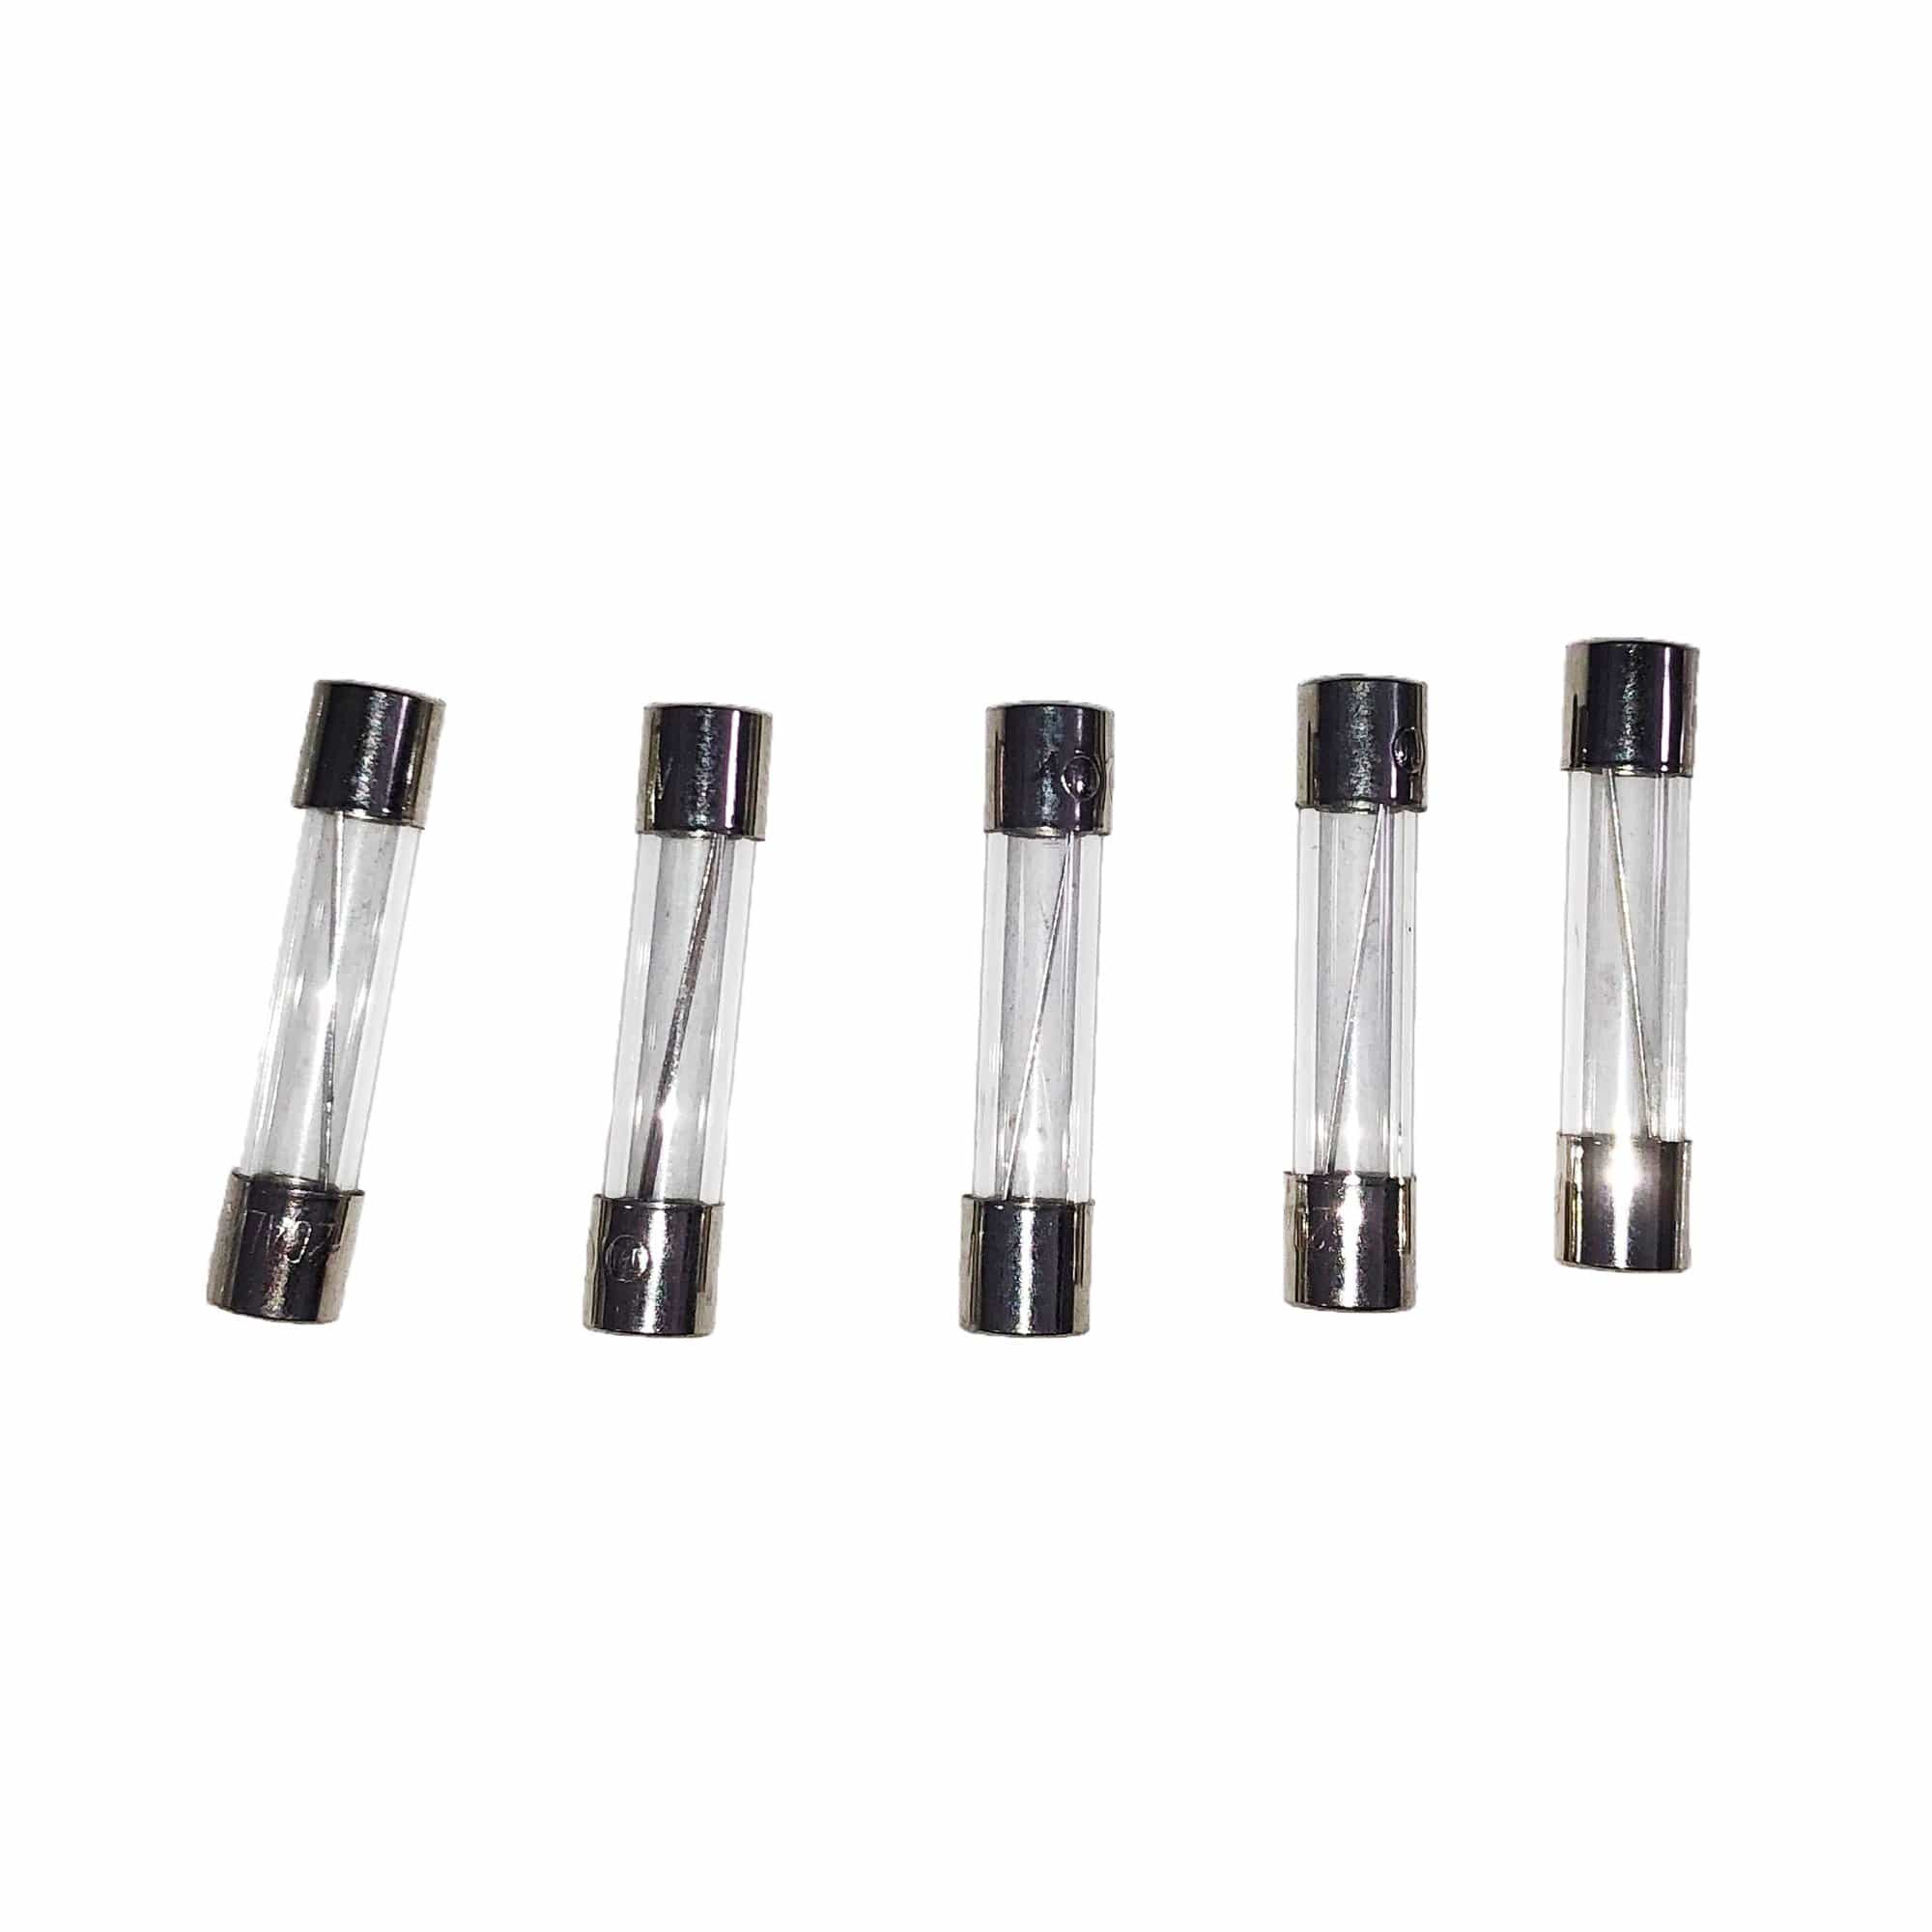 PowerBright F3A 3 Amp Glass Fuse 5 Pack